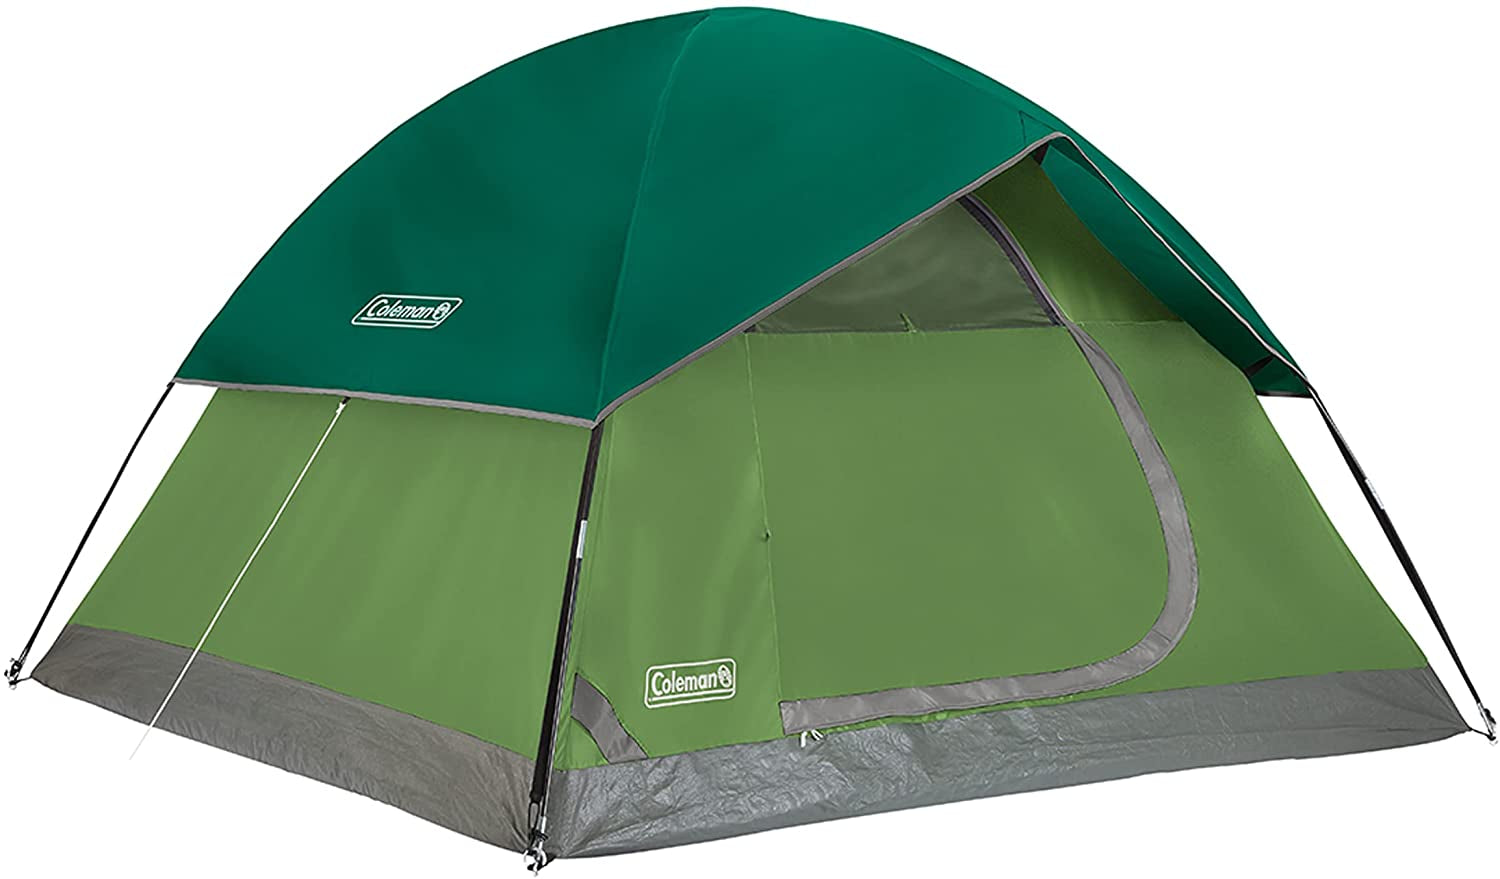 Coleman Sundome Camping Tent, 2/3/4/6 Person Dome Tent with Easy Setup, Included Rainfly and Weathertec Floor to Block Out Water, 2 Windows and 1 Ground Vent for Air Flow with Charging E-Port Flap